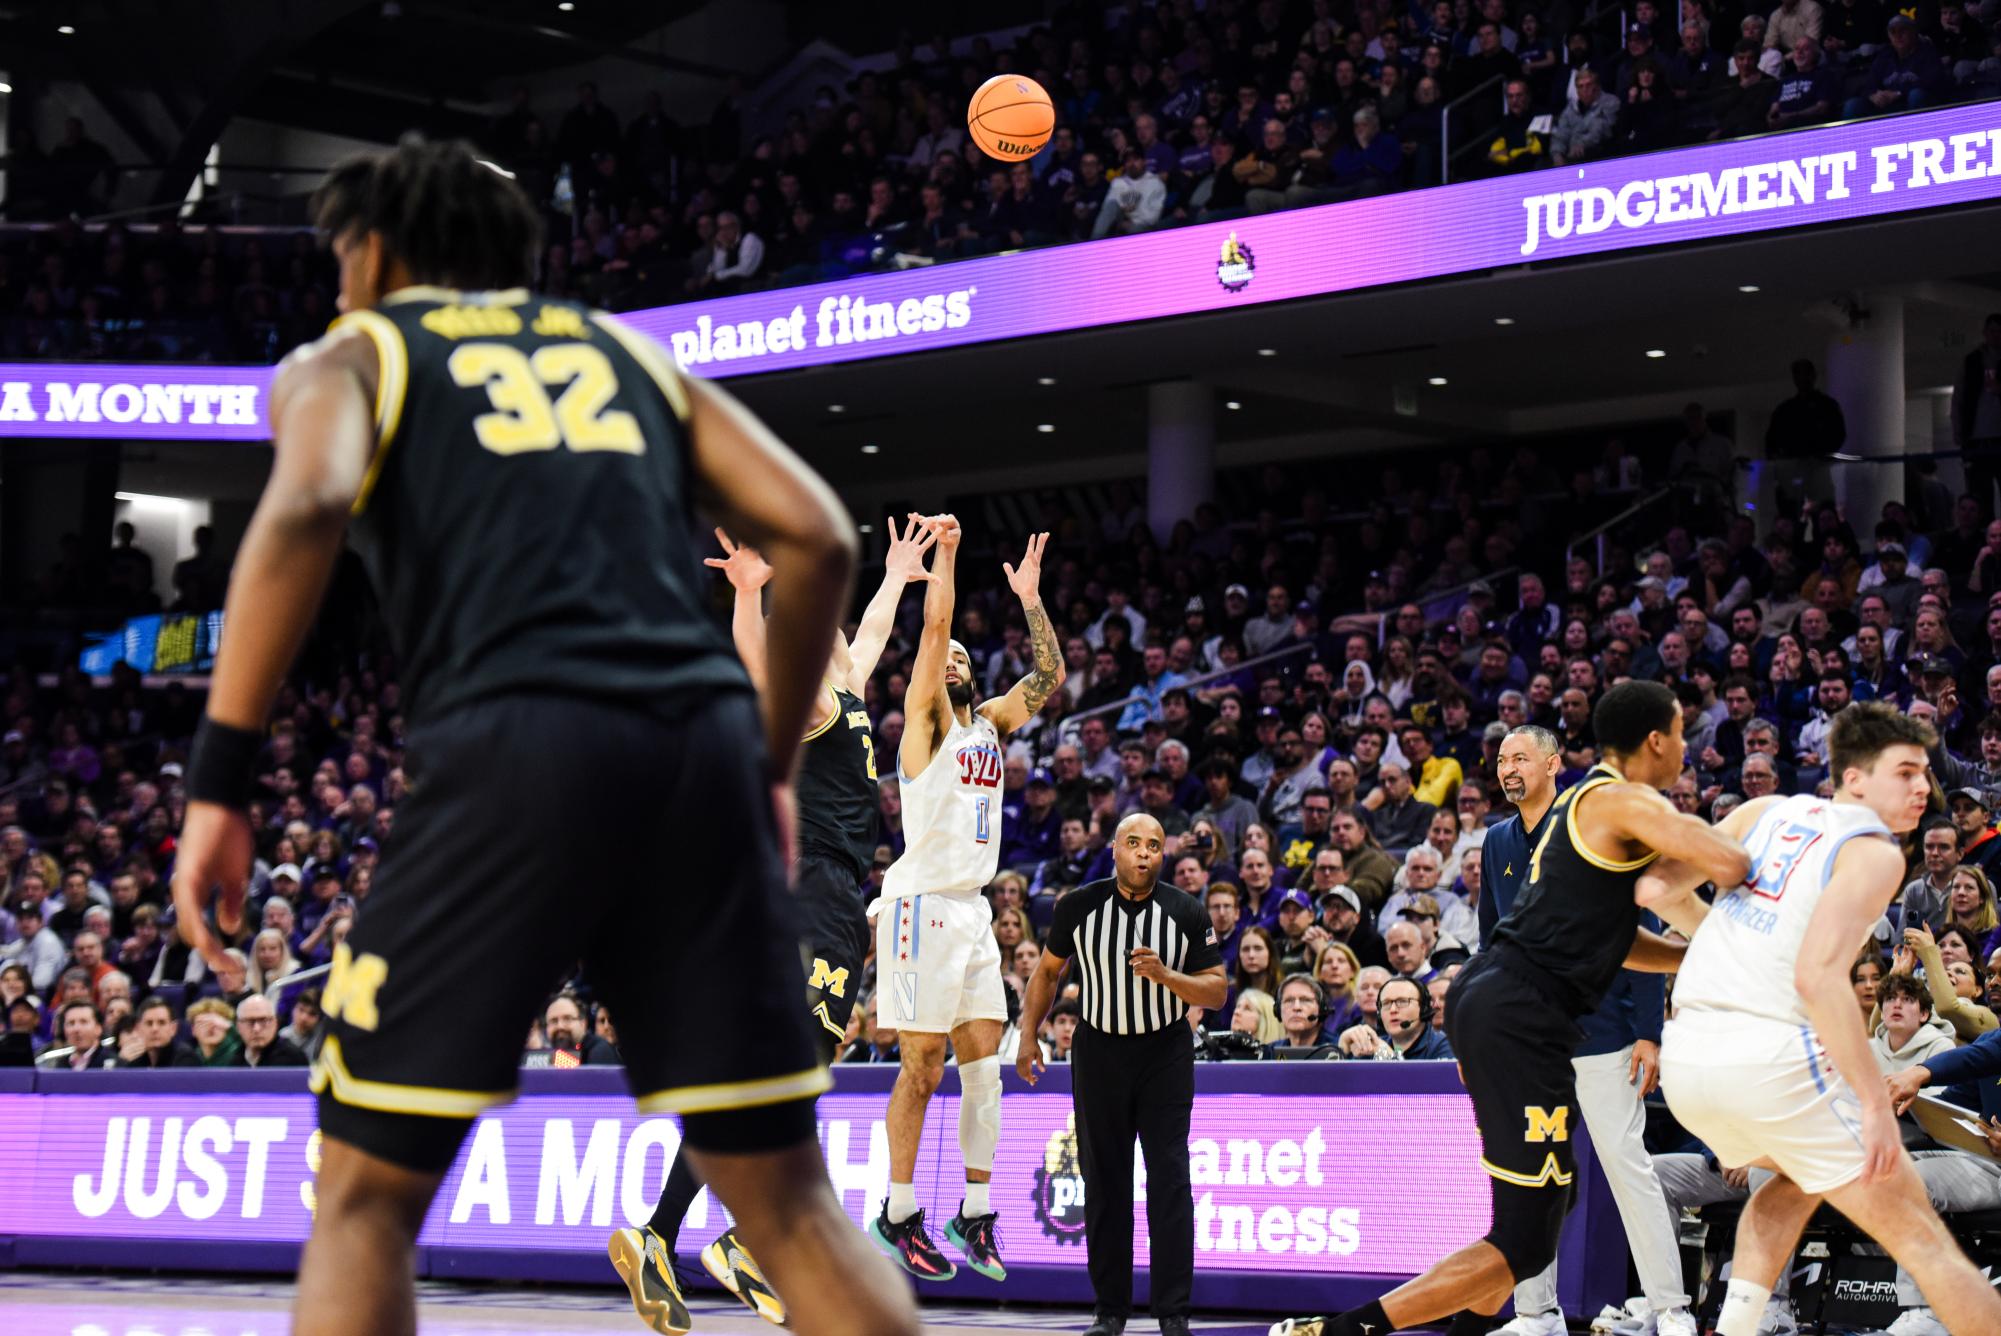 Northwestern’s Boo Buie wearing white shoots a three pointer while being defended by a basketball player wearing black and yellow.